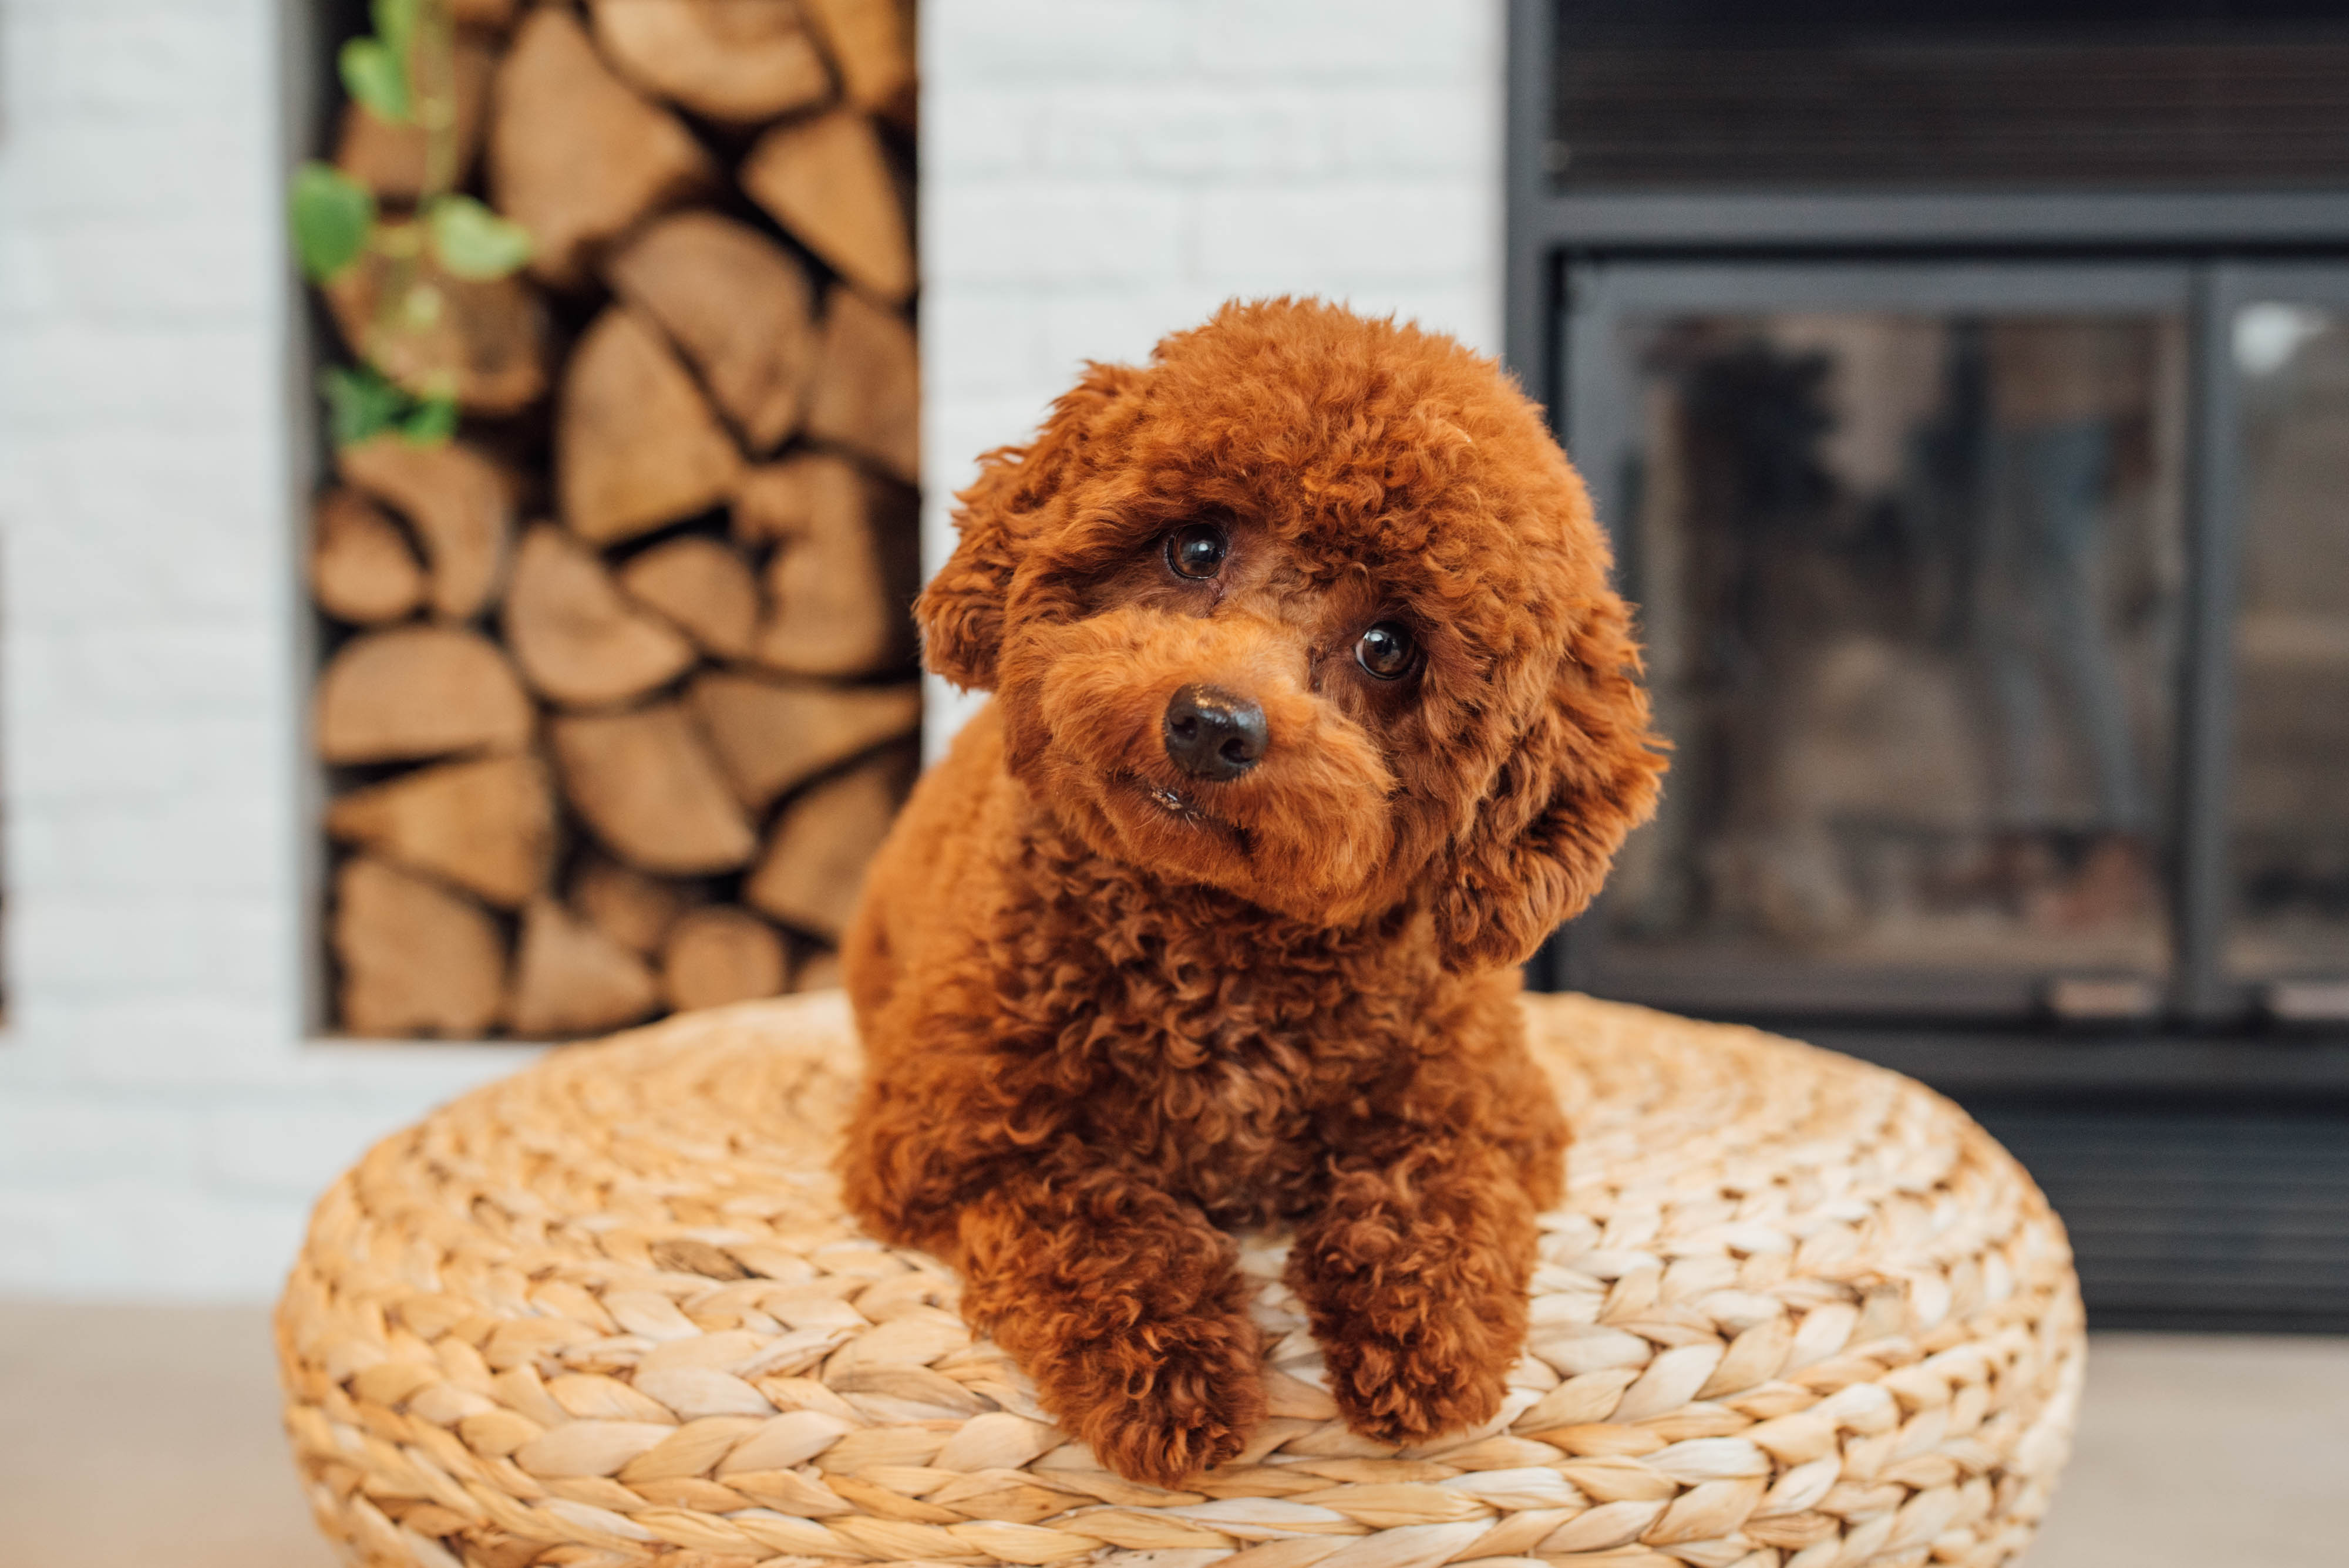 Your holistic guide to parenting Toy Poodles